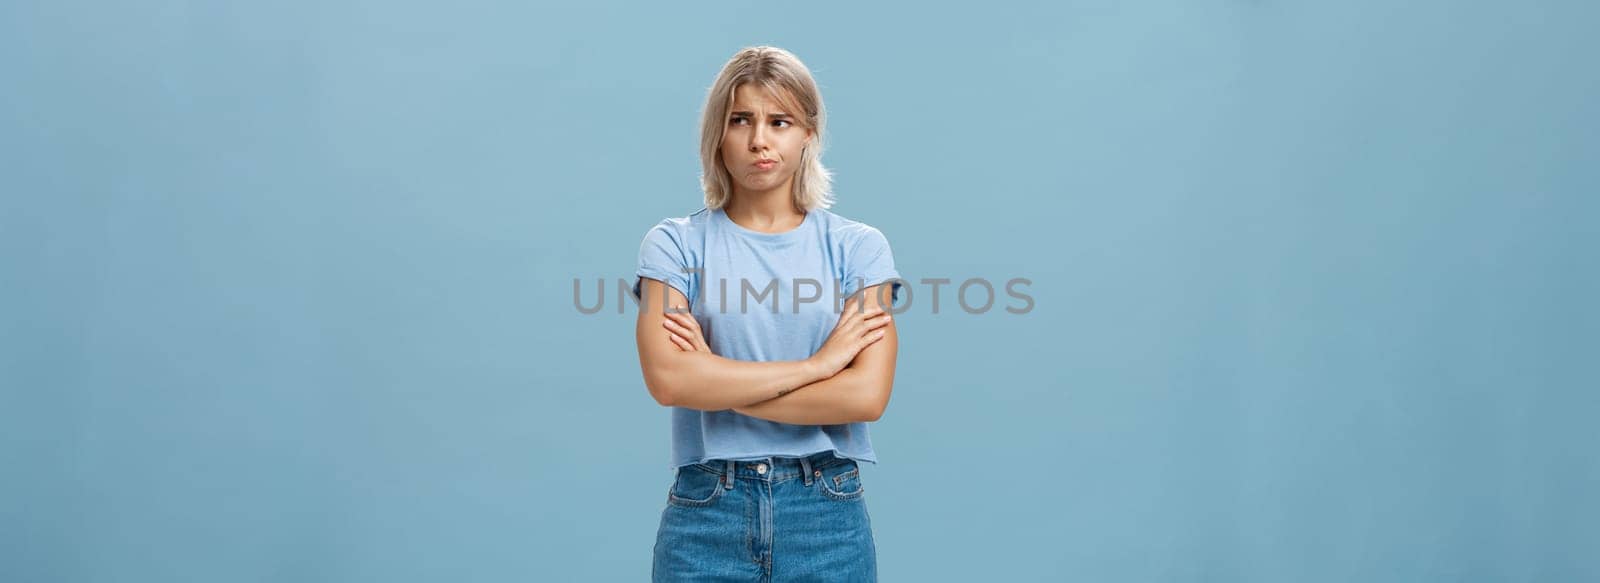 Uncertain troubled and perplexed attractive blond woman with tanned skin holding hands crossed on chest pouting and frowning looking right with worried unsure and doubtful look over blue wall. Feelings and emotions concept